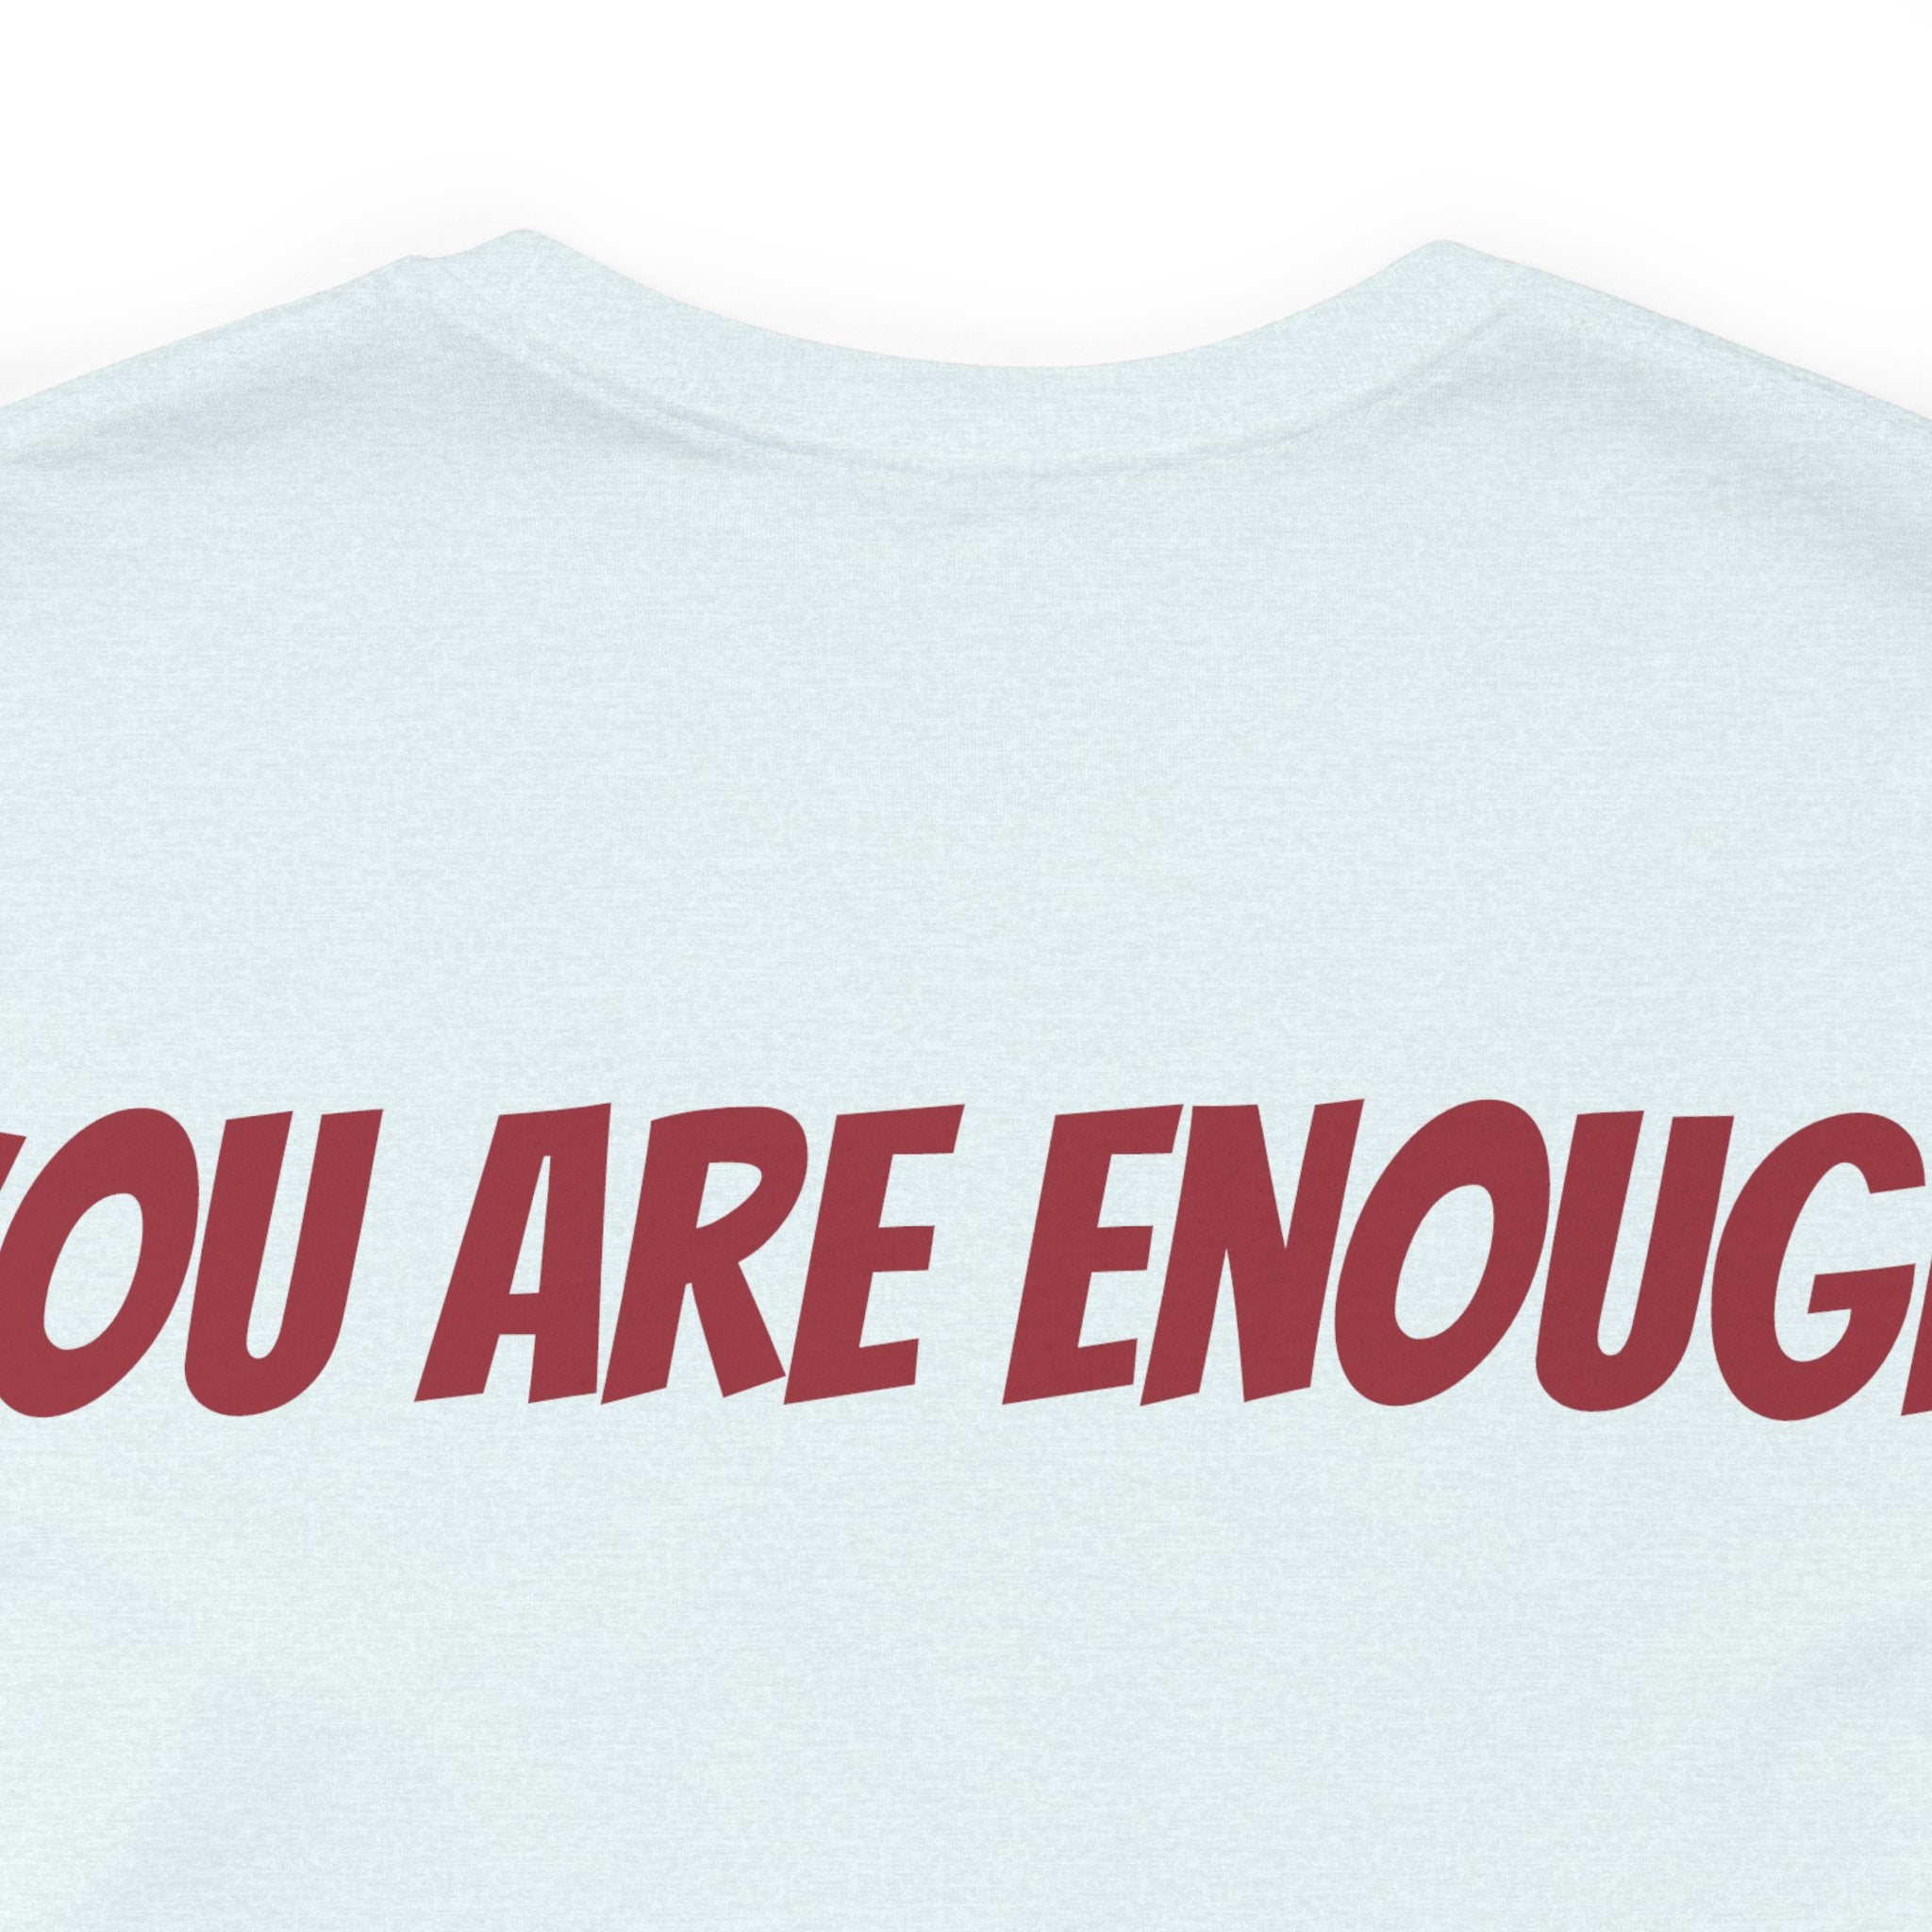 You Are Enough Short Sleeve Tee Bella+Canvas 3001 Heather Ice Blue Airlume Cotton Bella+Canvas 3001 Crew Neckline Jersey Short Sleeve Lightweight Fabric Mental Health Support Retail Fit Tear-away Label Tee Unisex Tee T-Shirt 5171177495945755253_2048 Printify